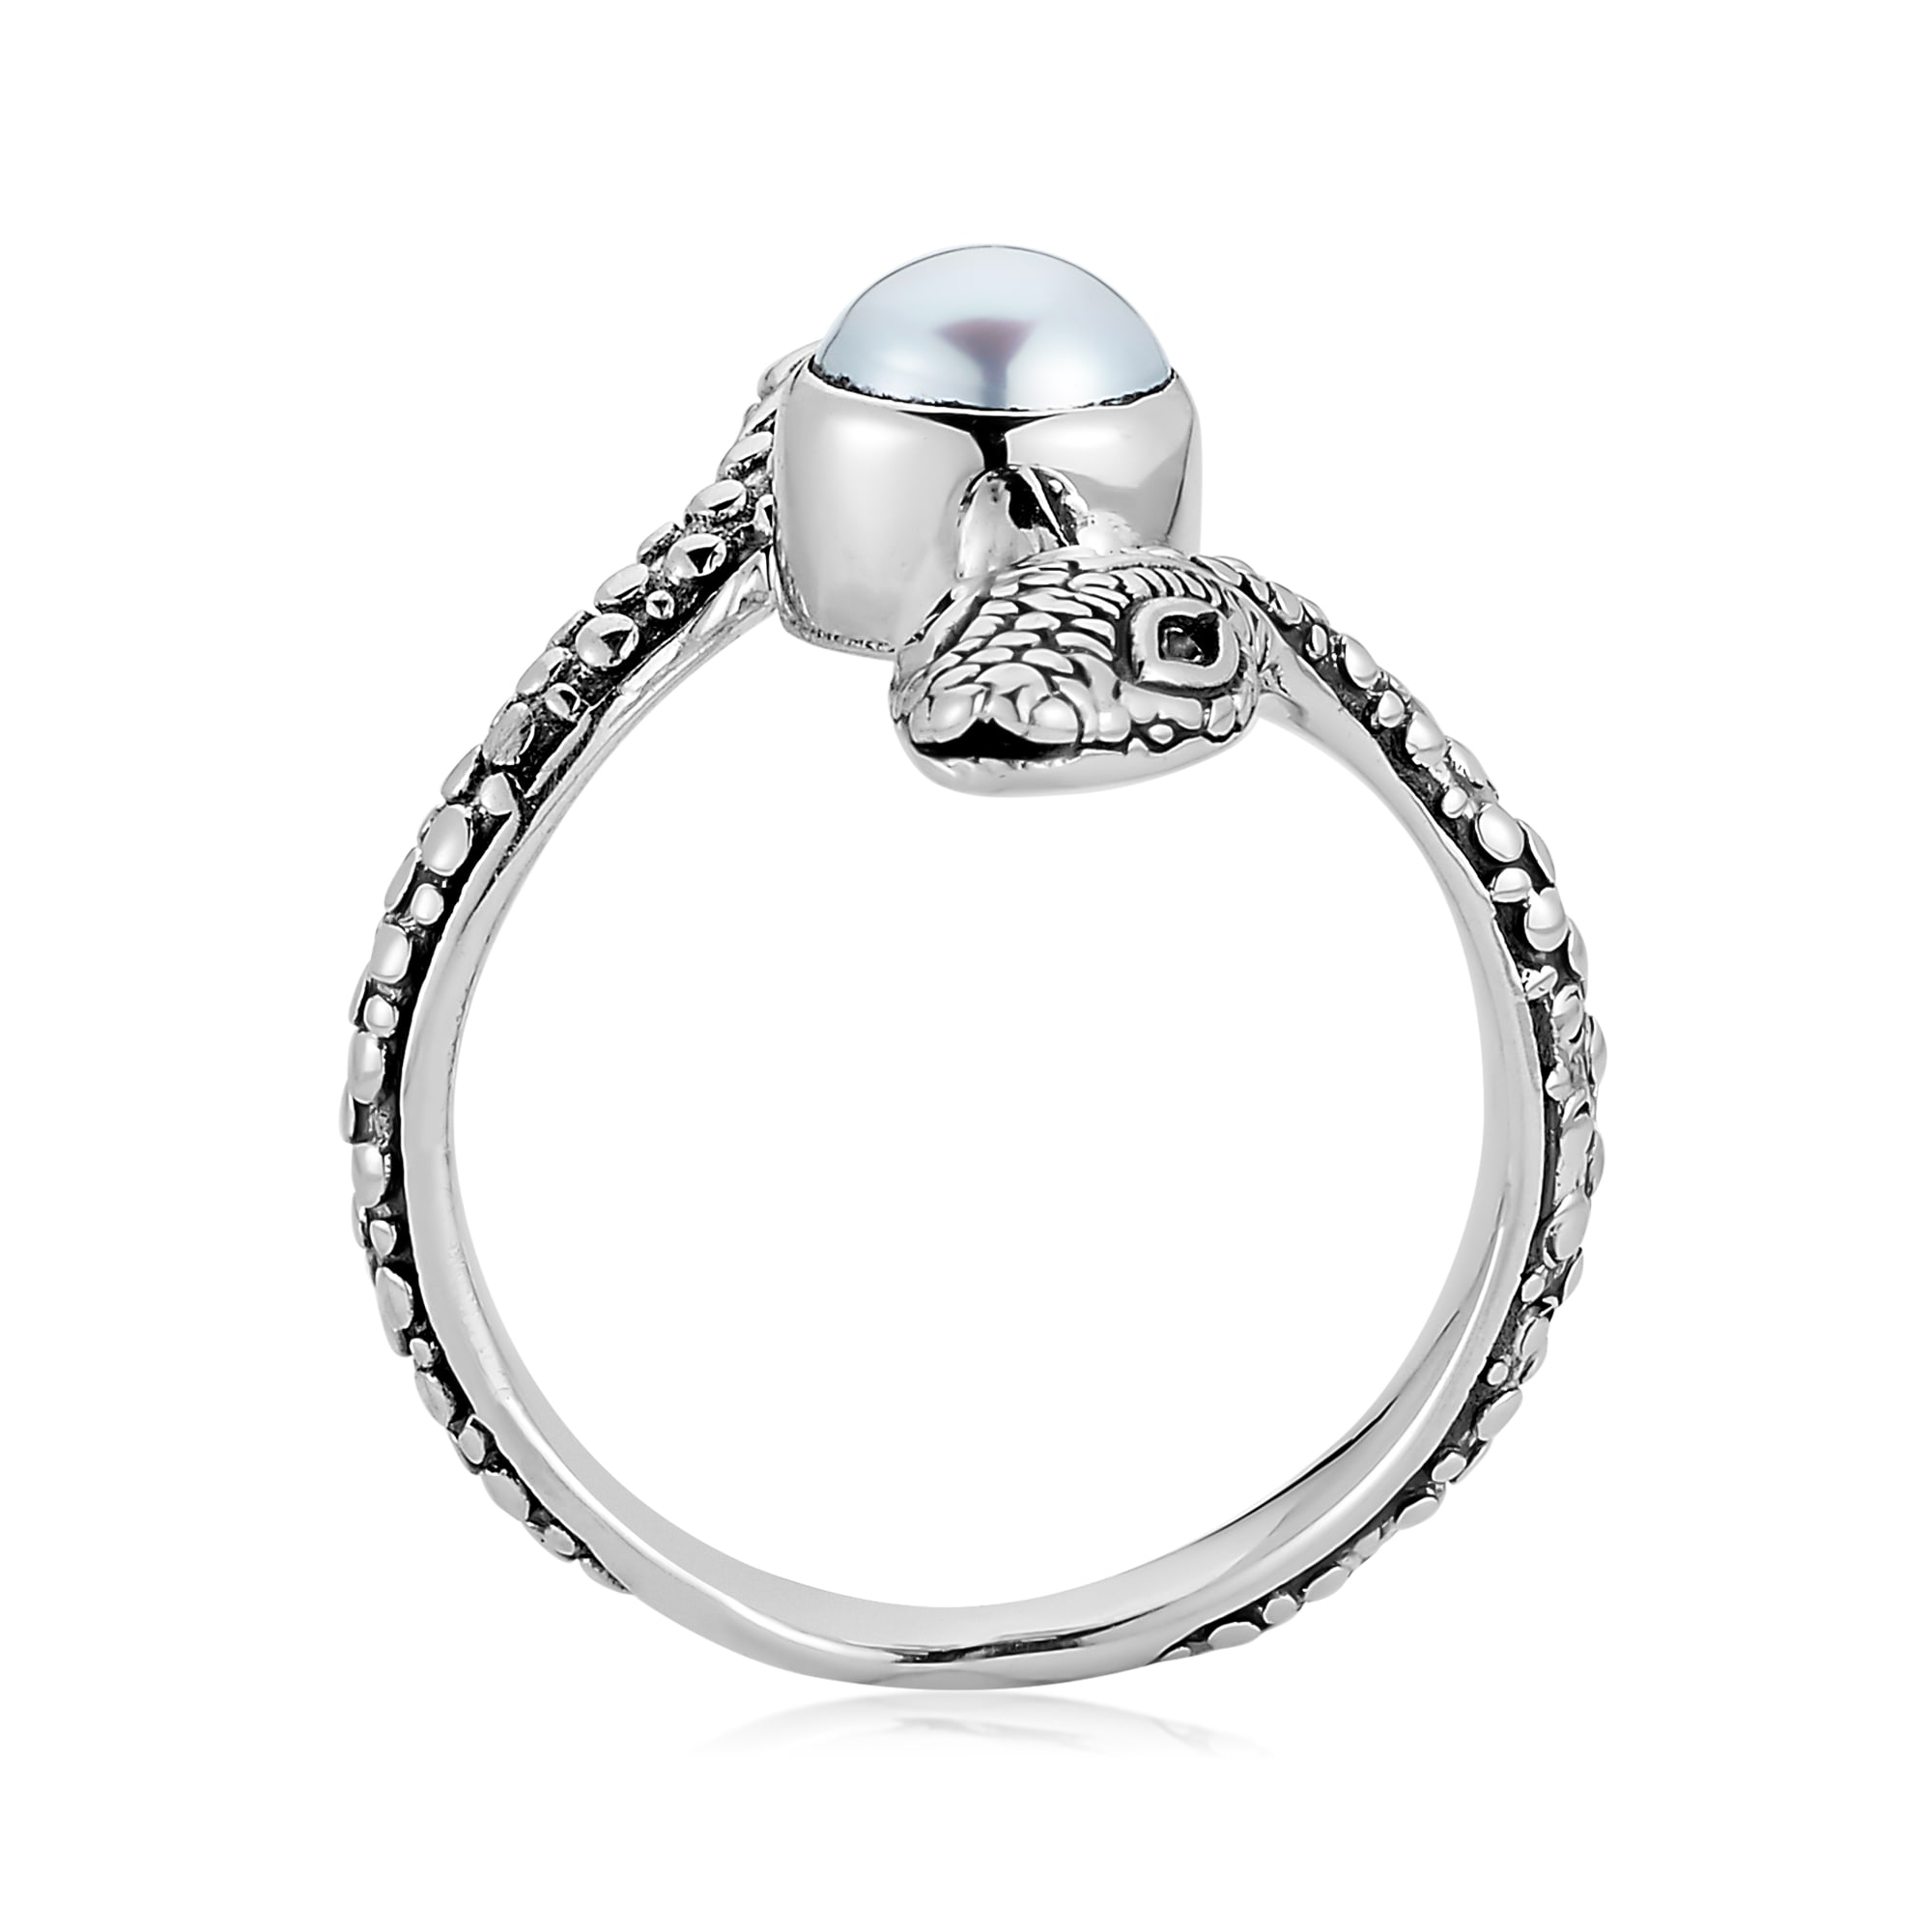 Snake Ring at Best Price in India